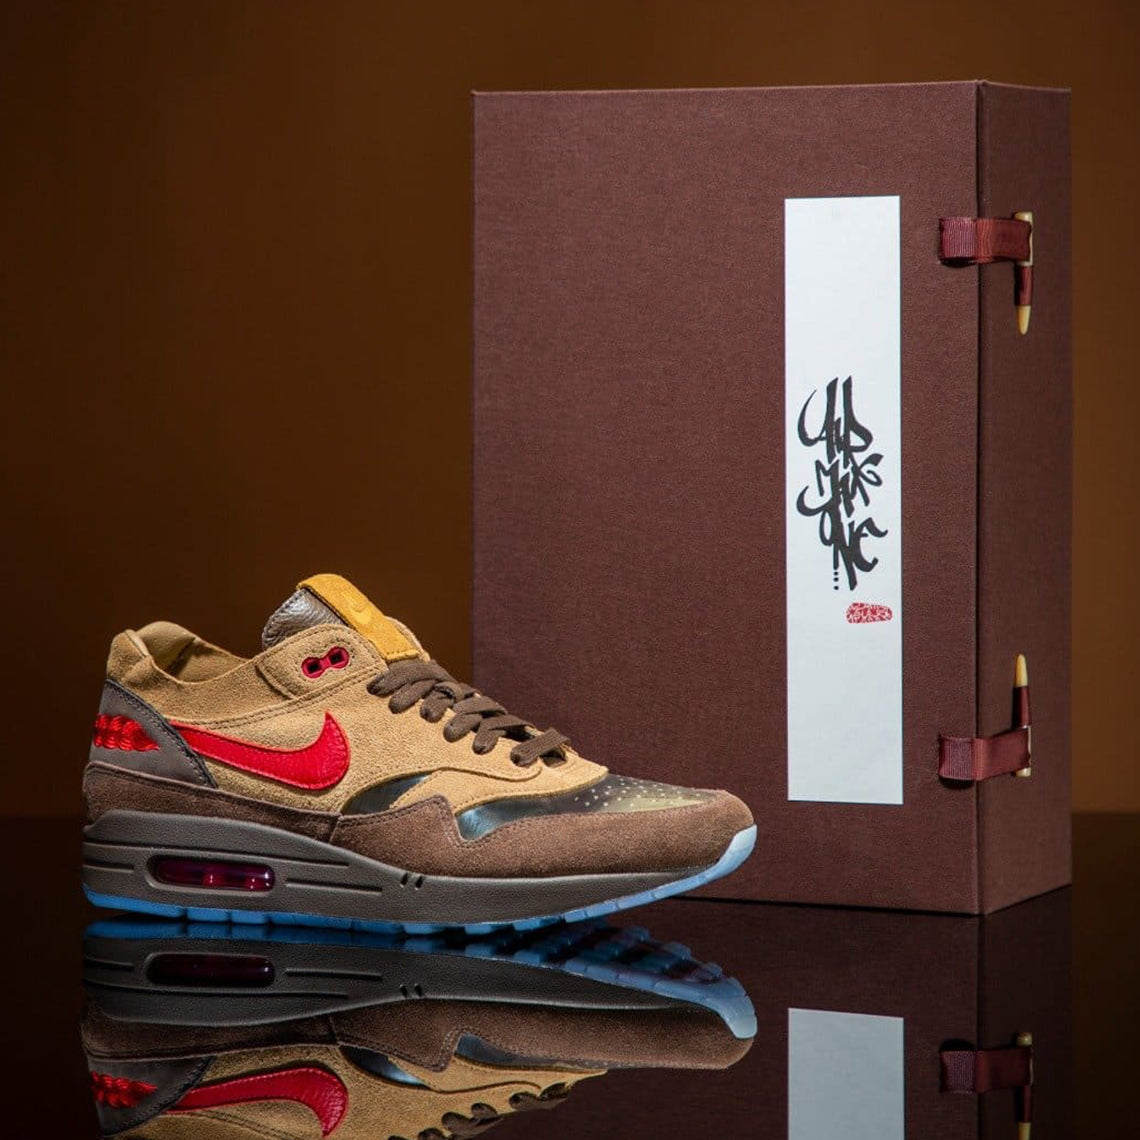 Nike Air Max 1 CLOT K.O.D 2021 Sneaker Release Temple Wear Blog News Red Traditional Logo  Swoosh Red Brown Japanese Tea Inspired Transparent Running Shoes Kiss Of Dead Sneaker Release Friends & Family Packaging